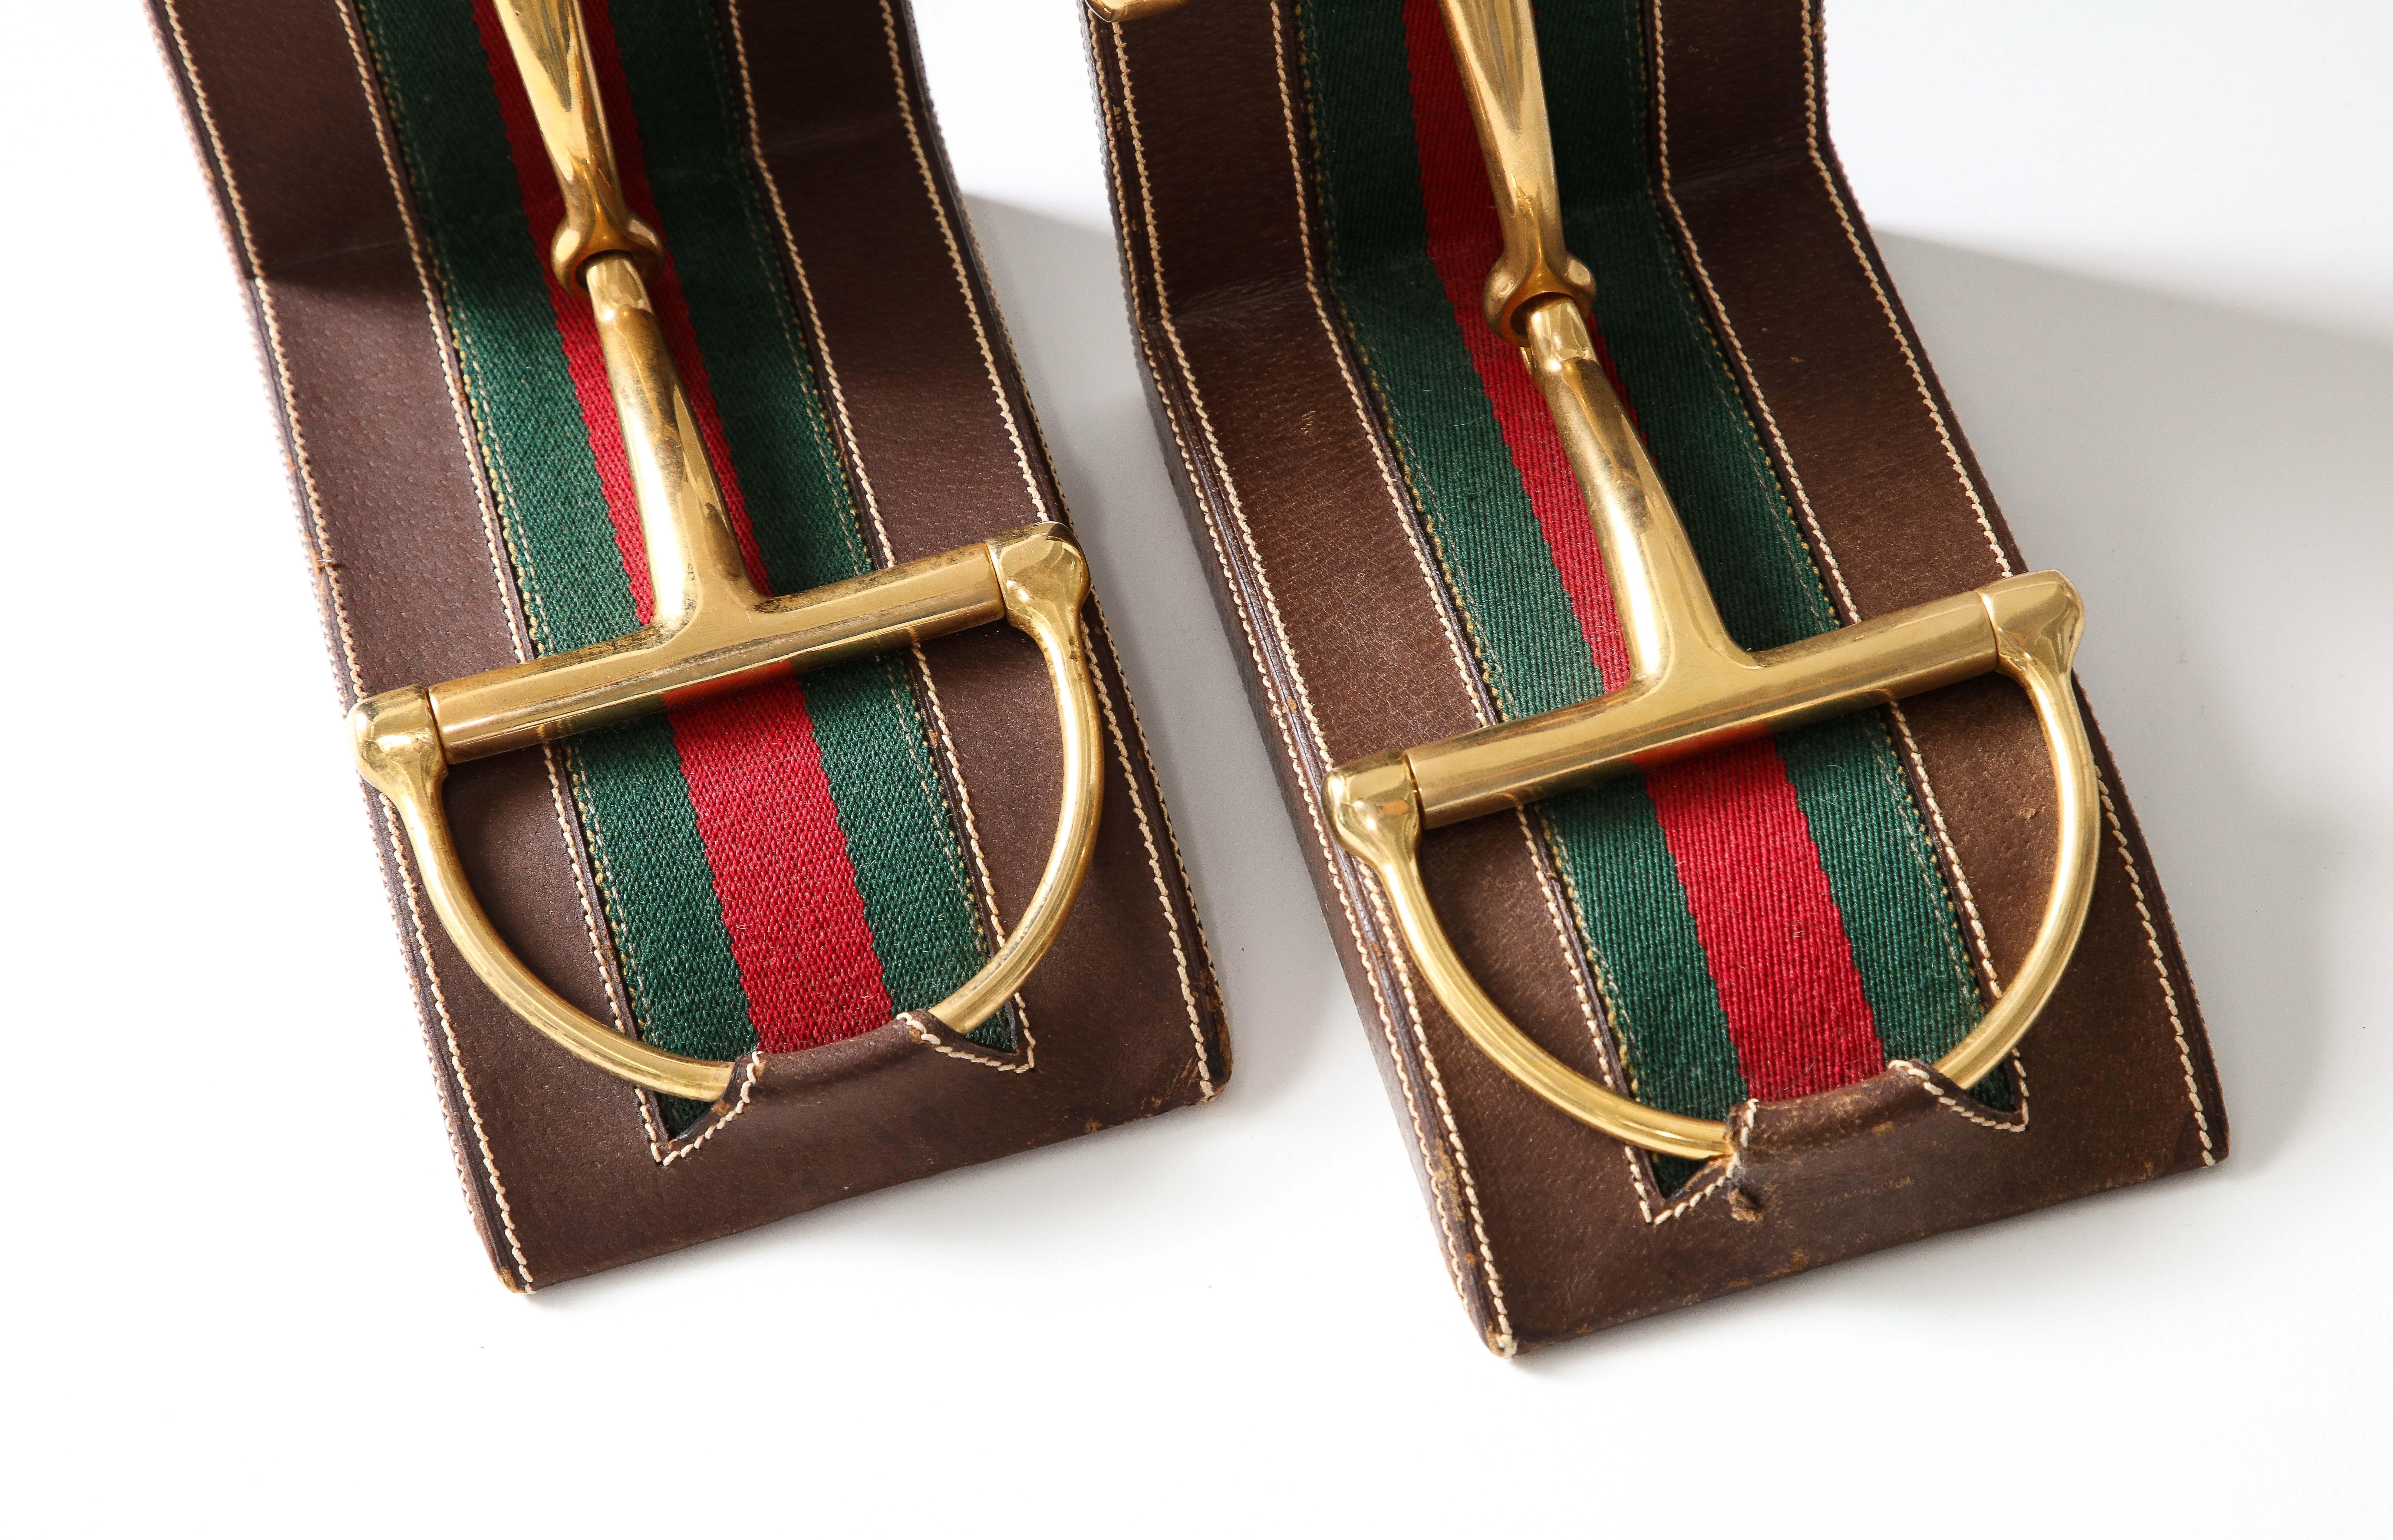 Pair of Leather and Brass Bookends, Gucci, Italy, c. 1970 For Sale 8